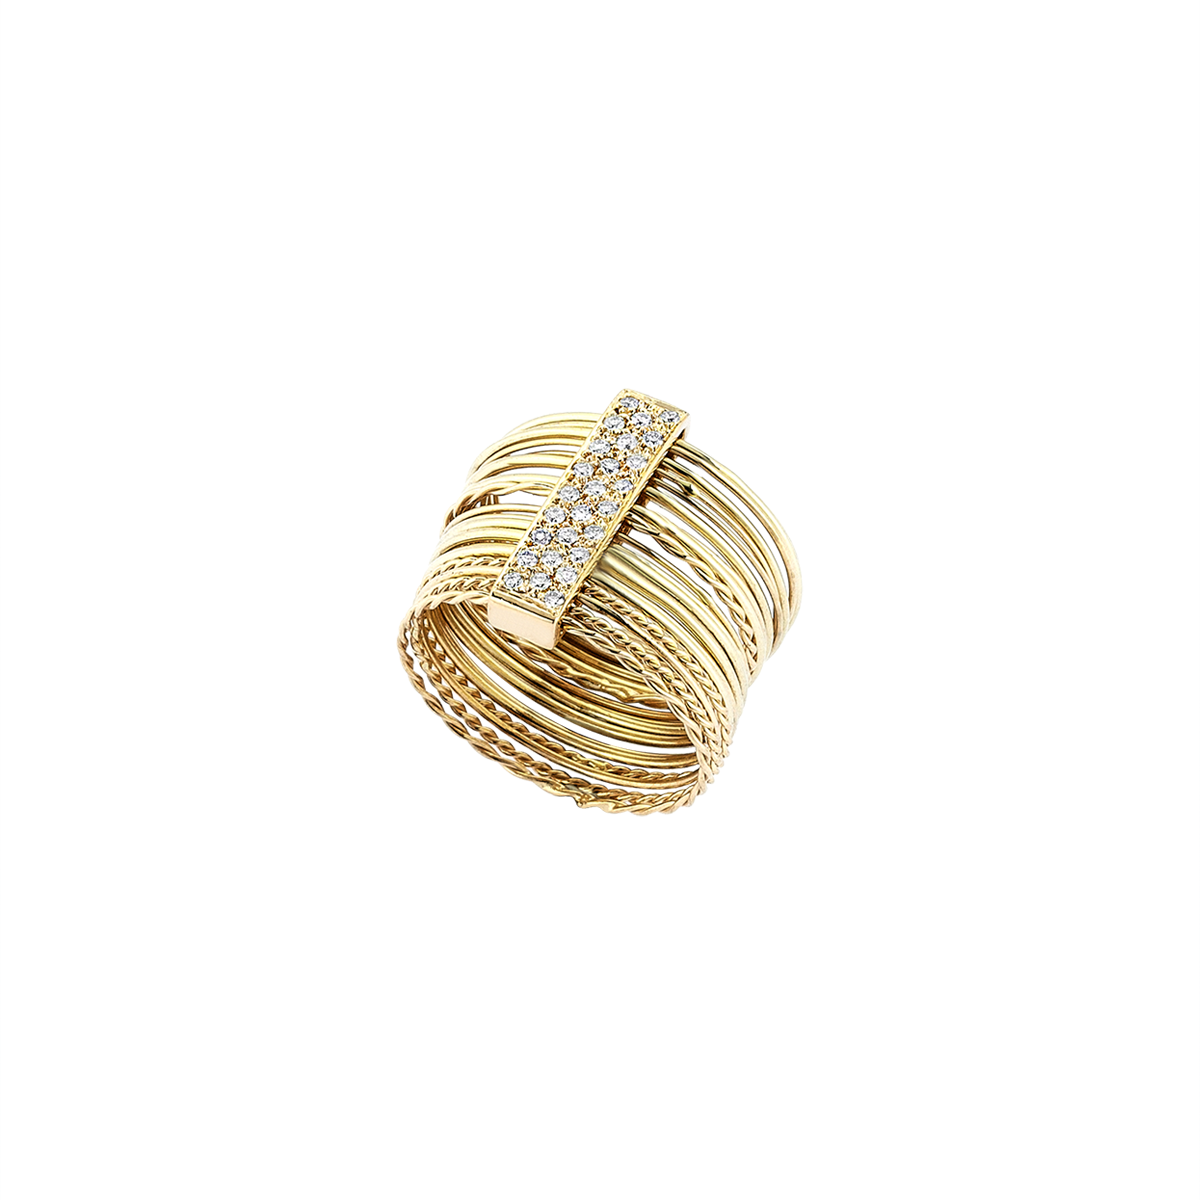 Attached Coils Ring in Yellow Gold - Her Story Shop